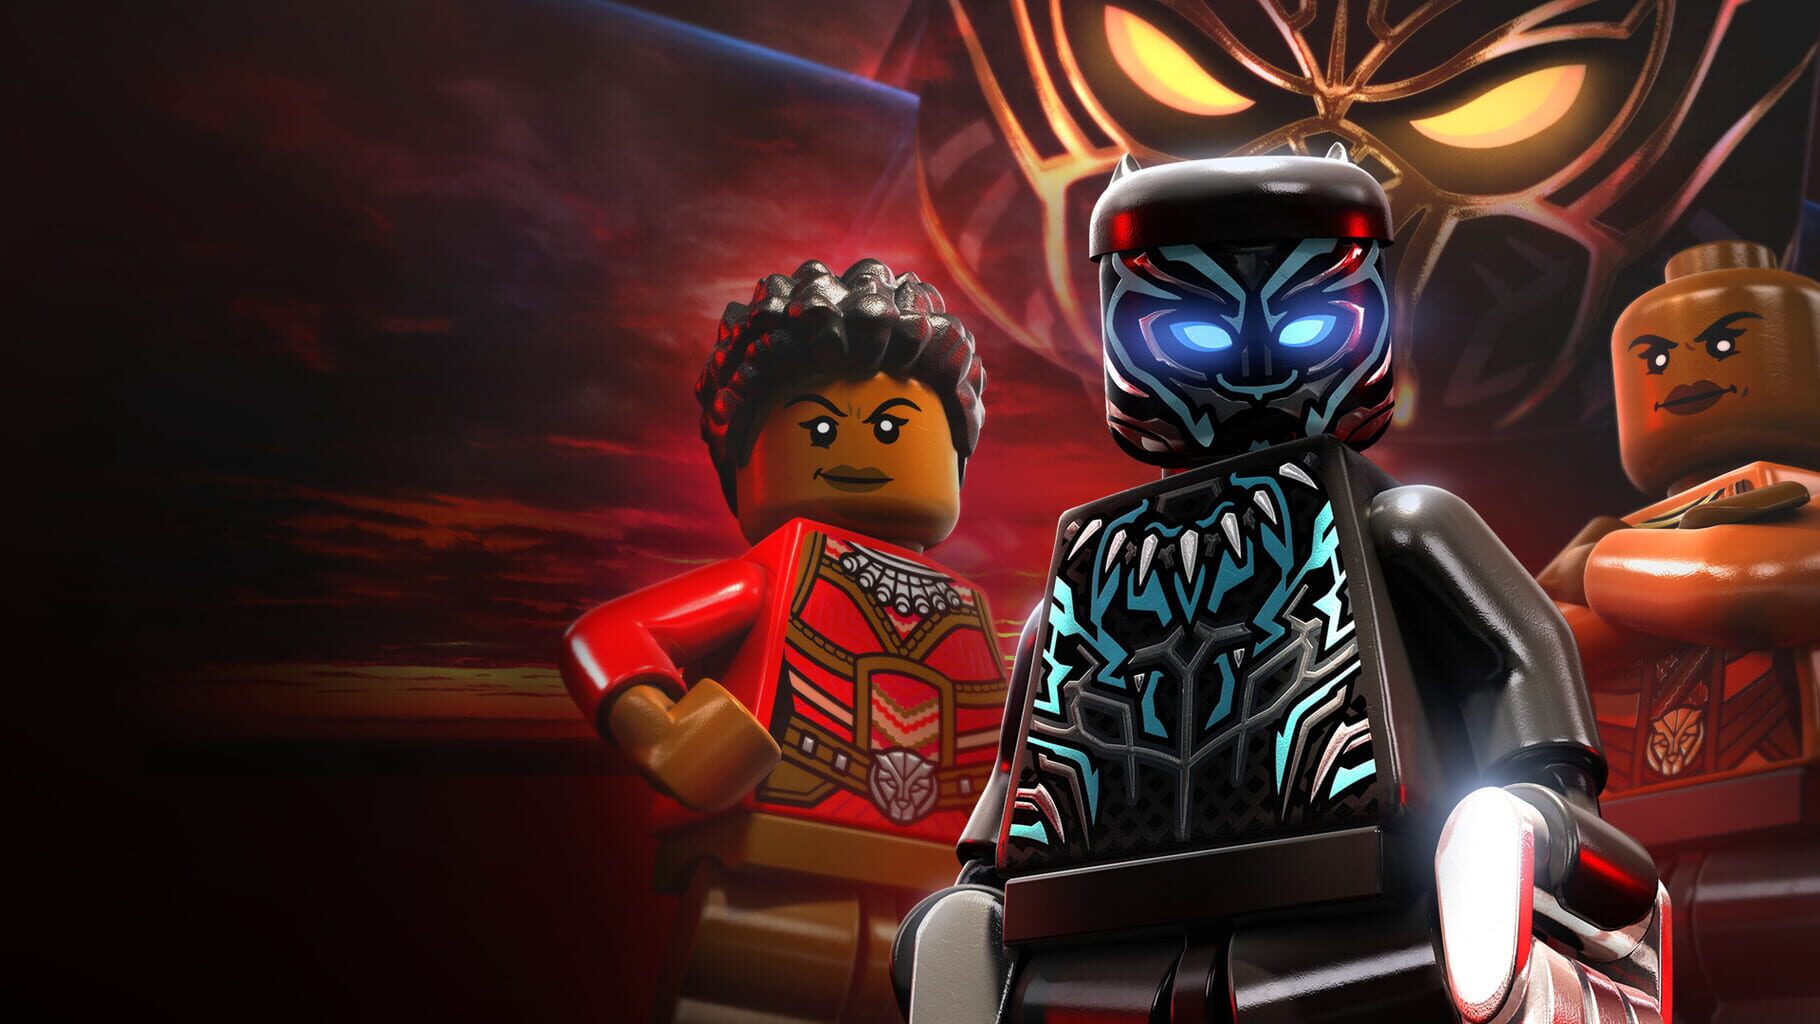 Captura de pantalla - LEGO Marvel Super Heroes 2: Marvel's Black Panther Movie Character and Level Pack